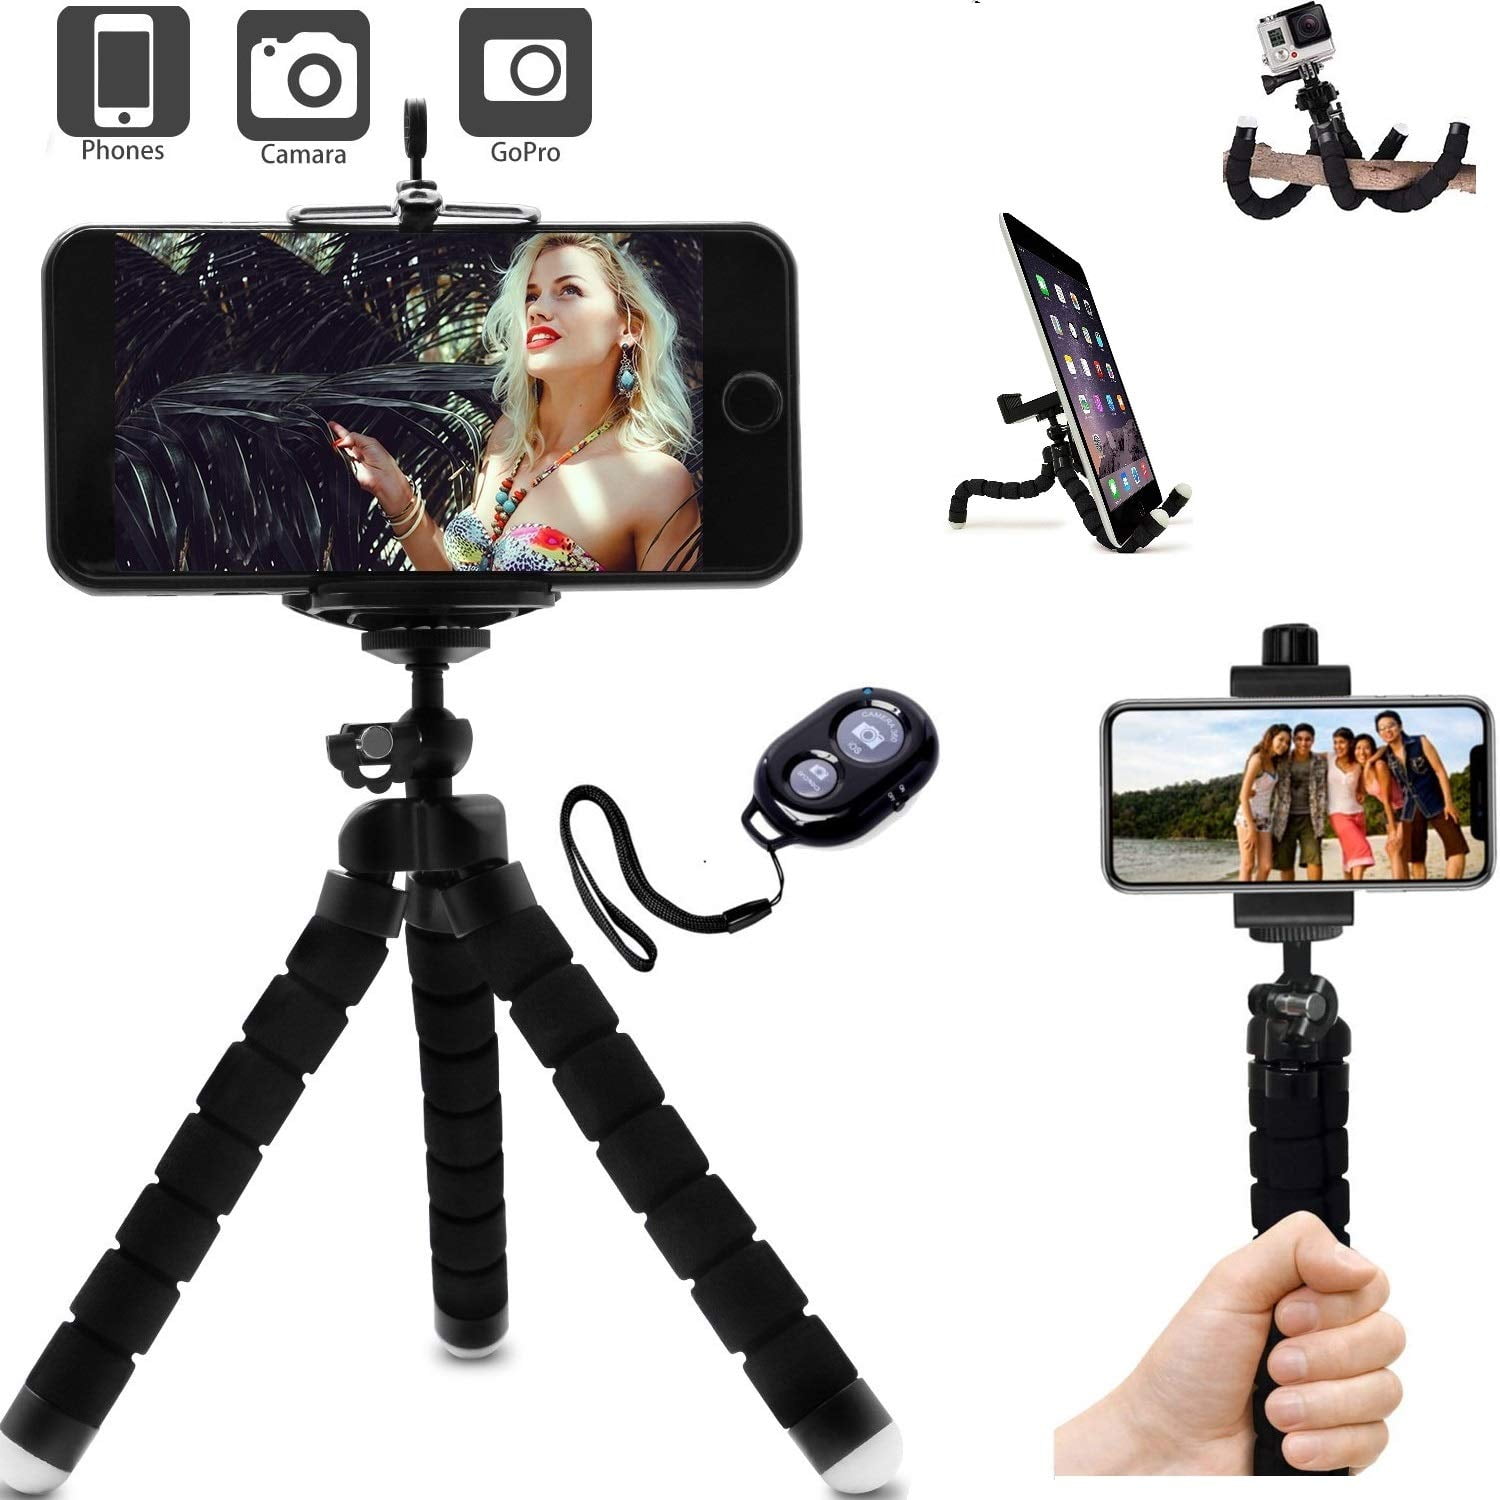 Compatible with iPhone GoPro Flexible Mobile Cell Phone Tripod DSLR Samsung Mini Travel Tripod Stand Holder with Wireless Remote Shutter Android Action Camera 